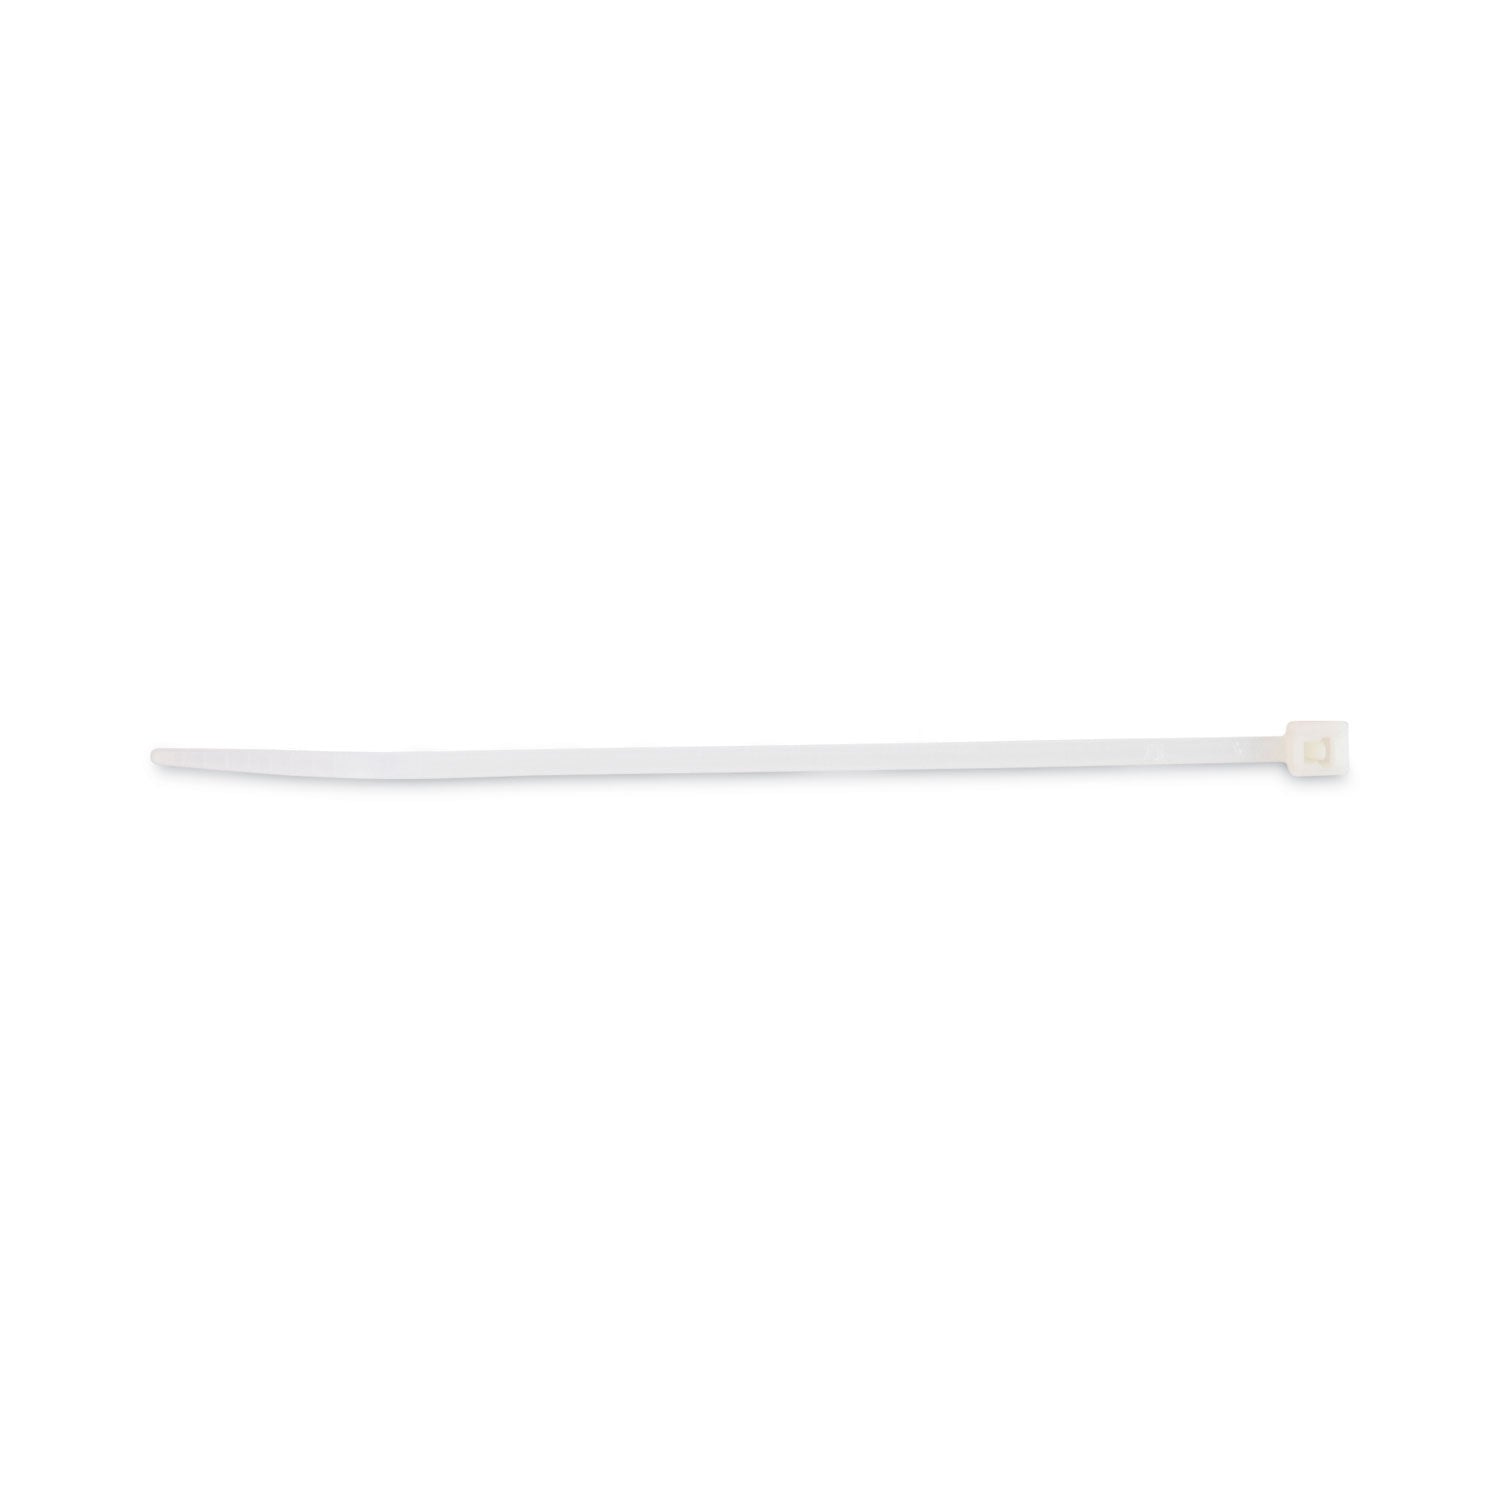 Nylon Cable Ties, 4 x 0.06, 18 lb, Natural, 1,000/Pack - 